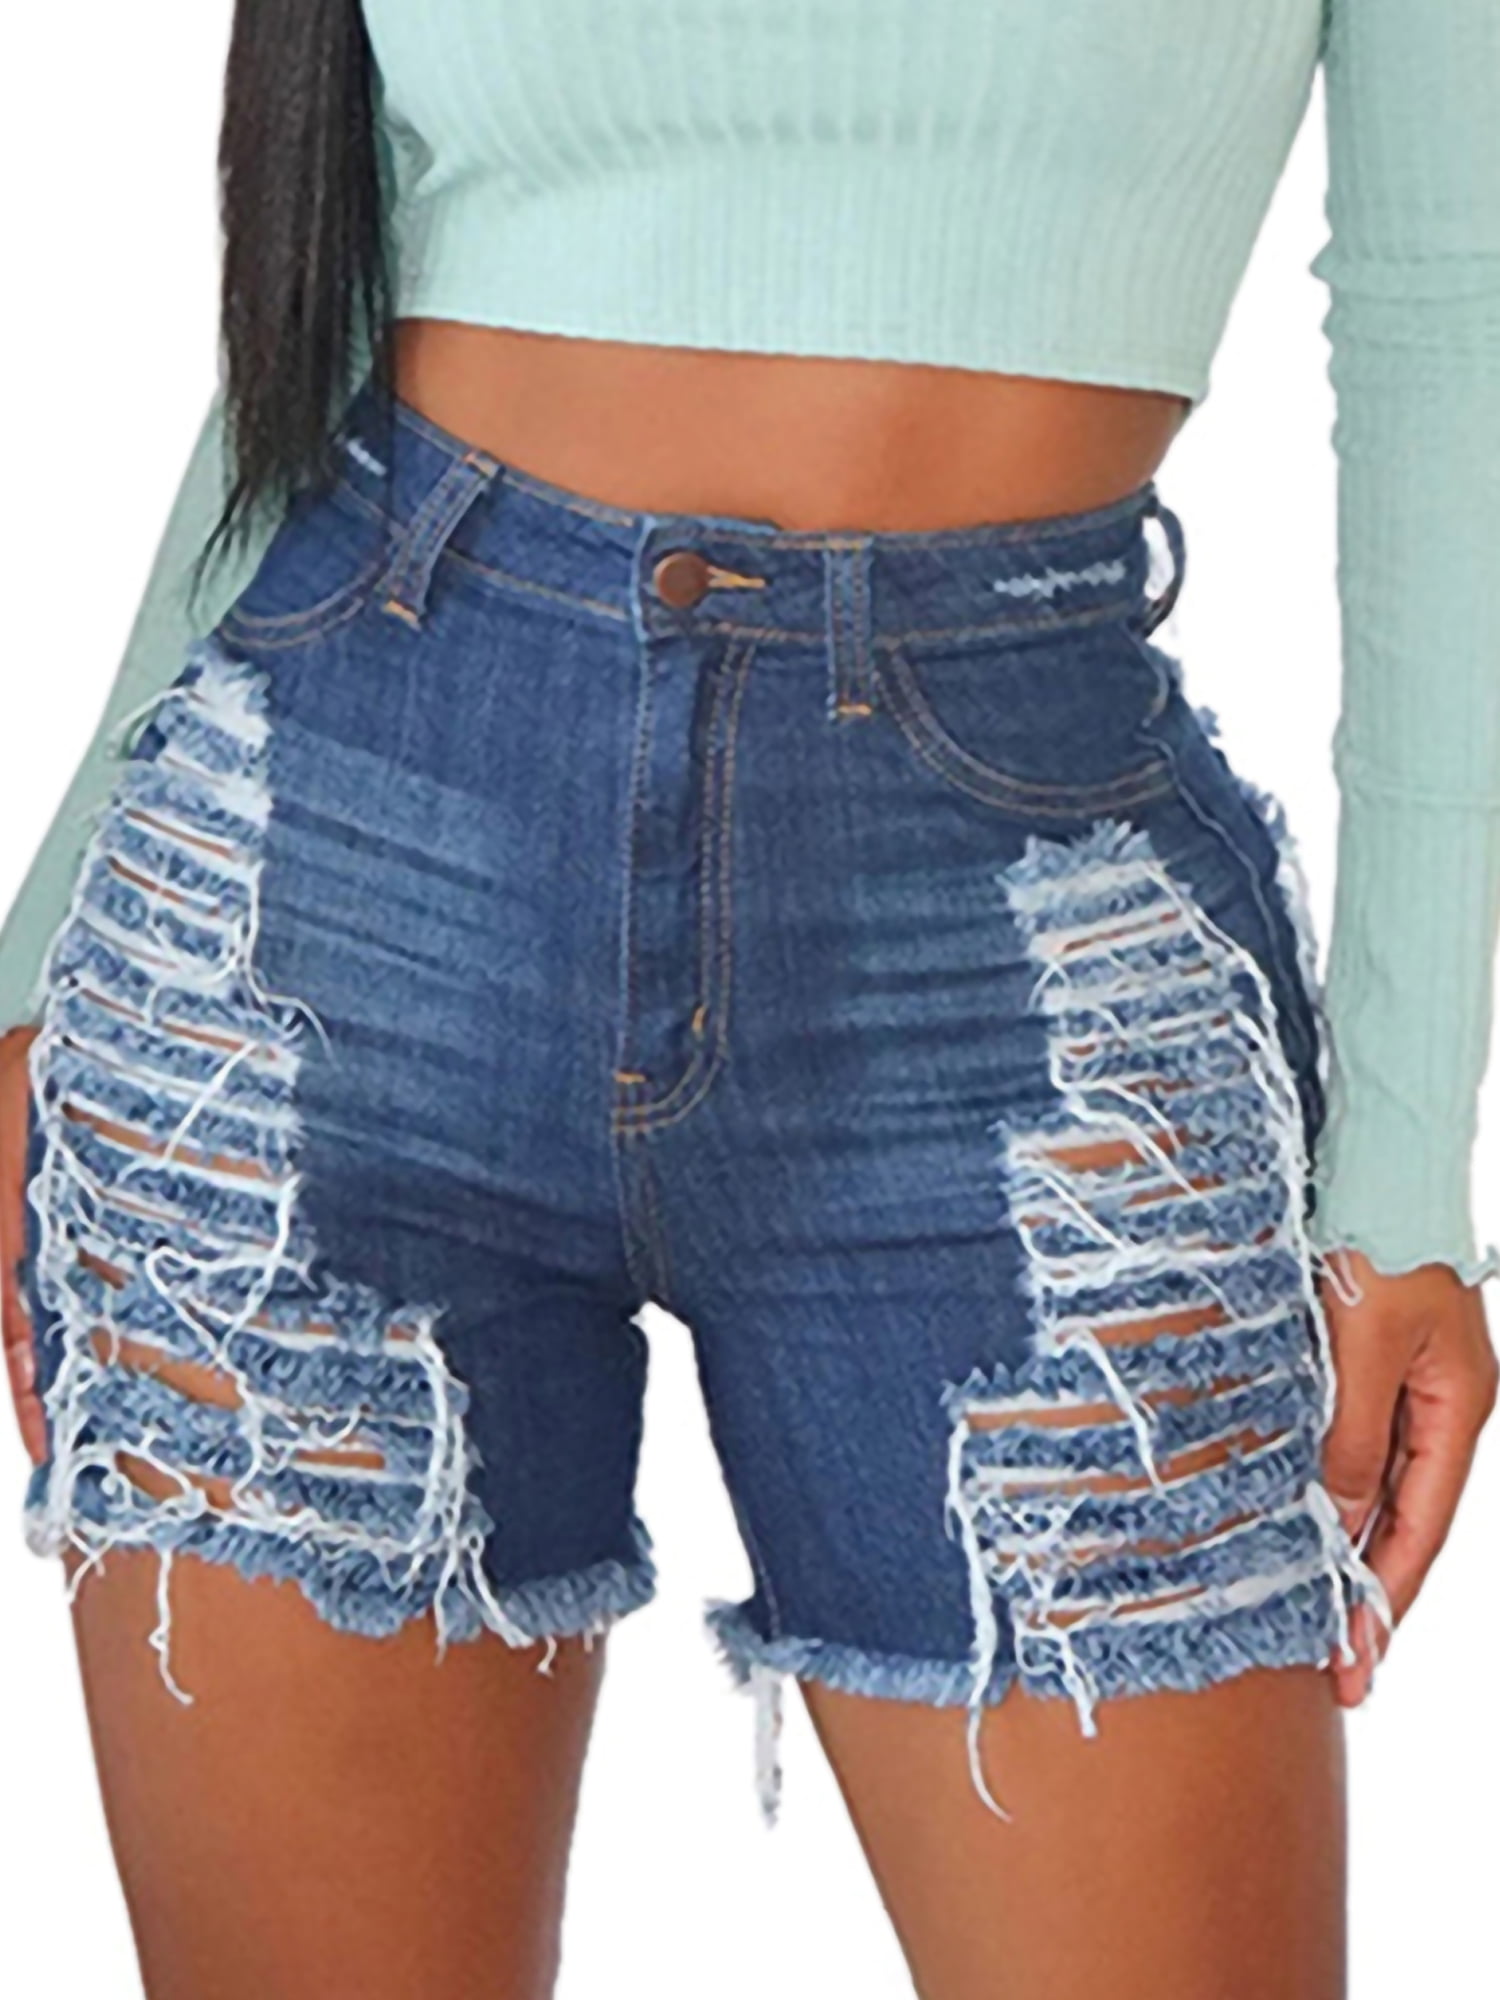 High Waisted Jean Shorts for Women Frayed Raw Hem Ripped Distressed Shorts Casual Stretchy Hot Denim Shorts for Summer 